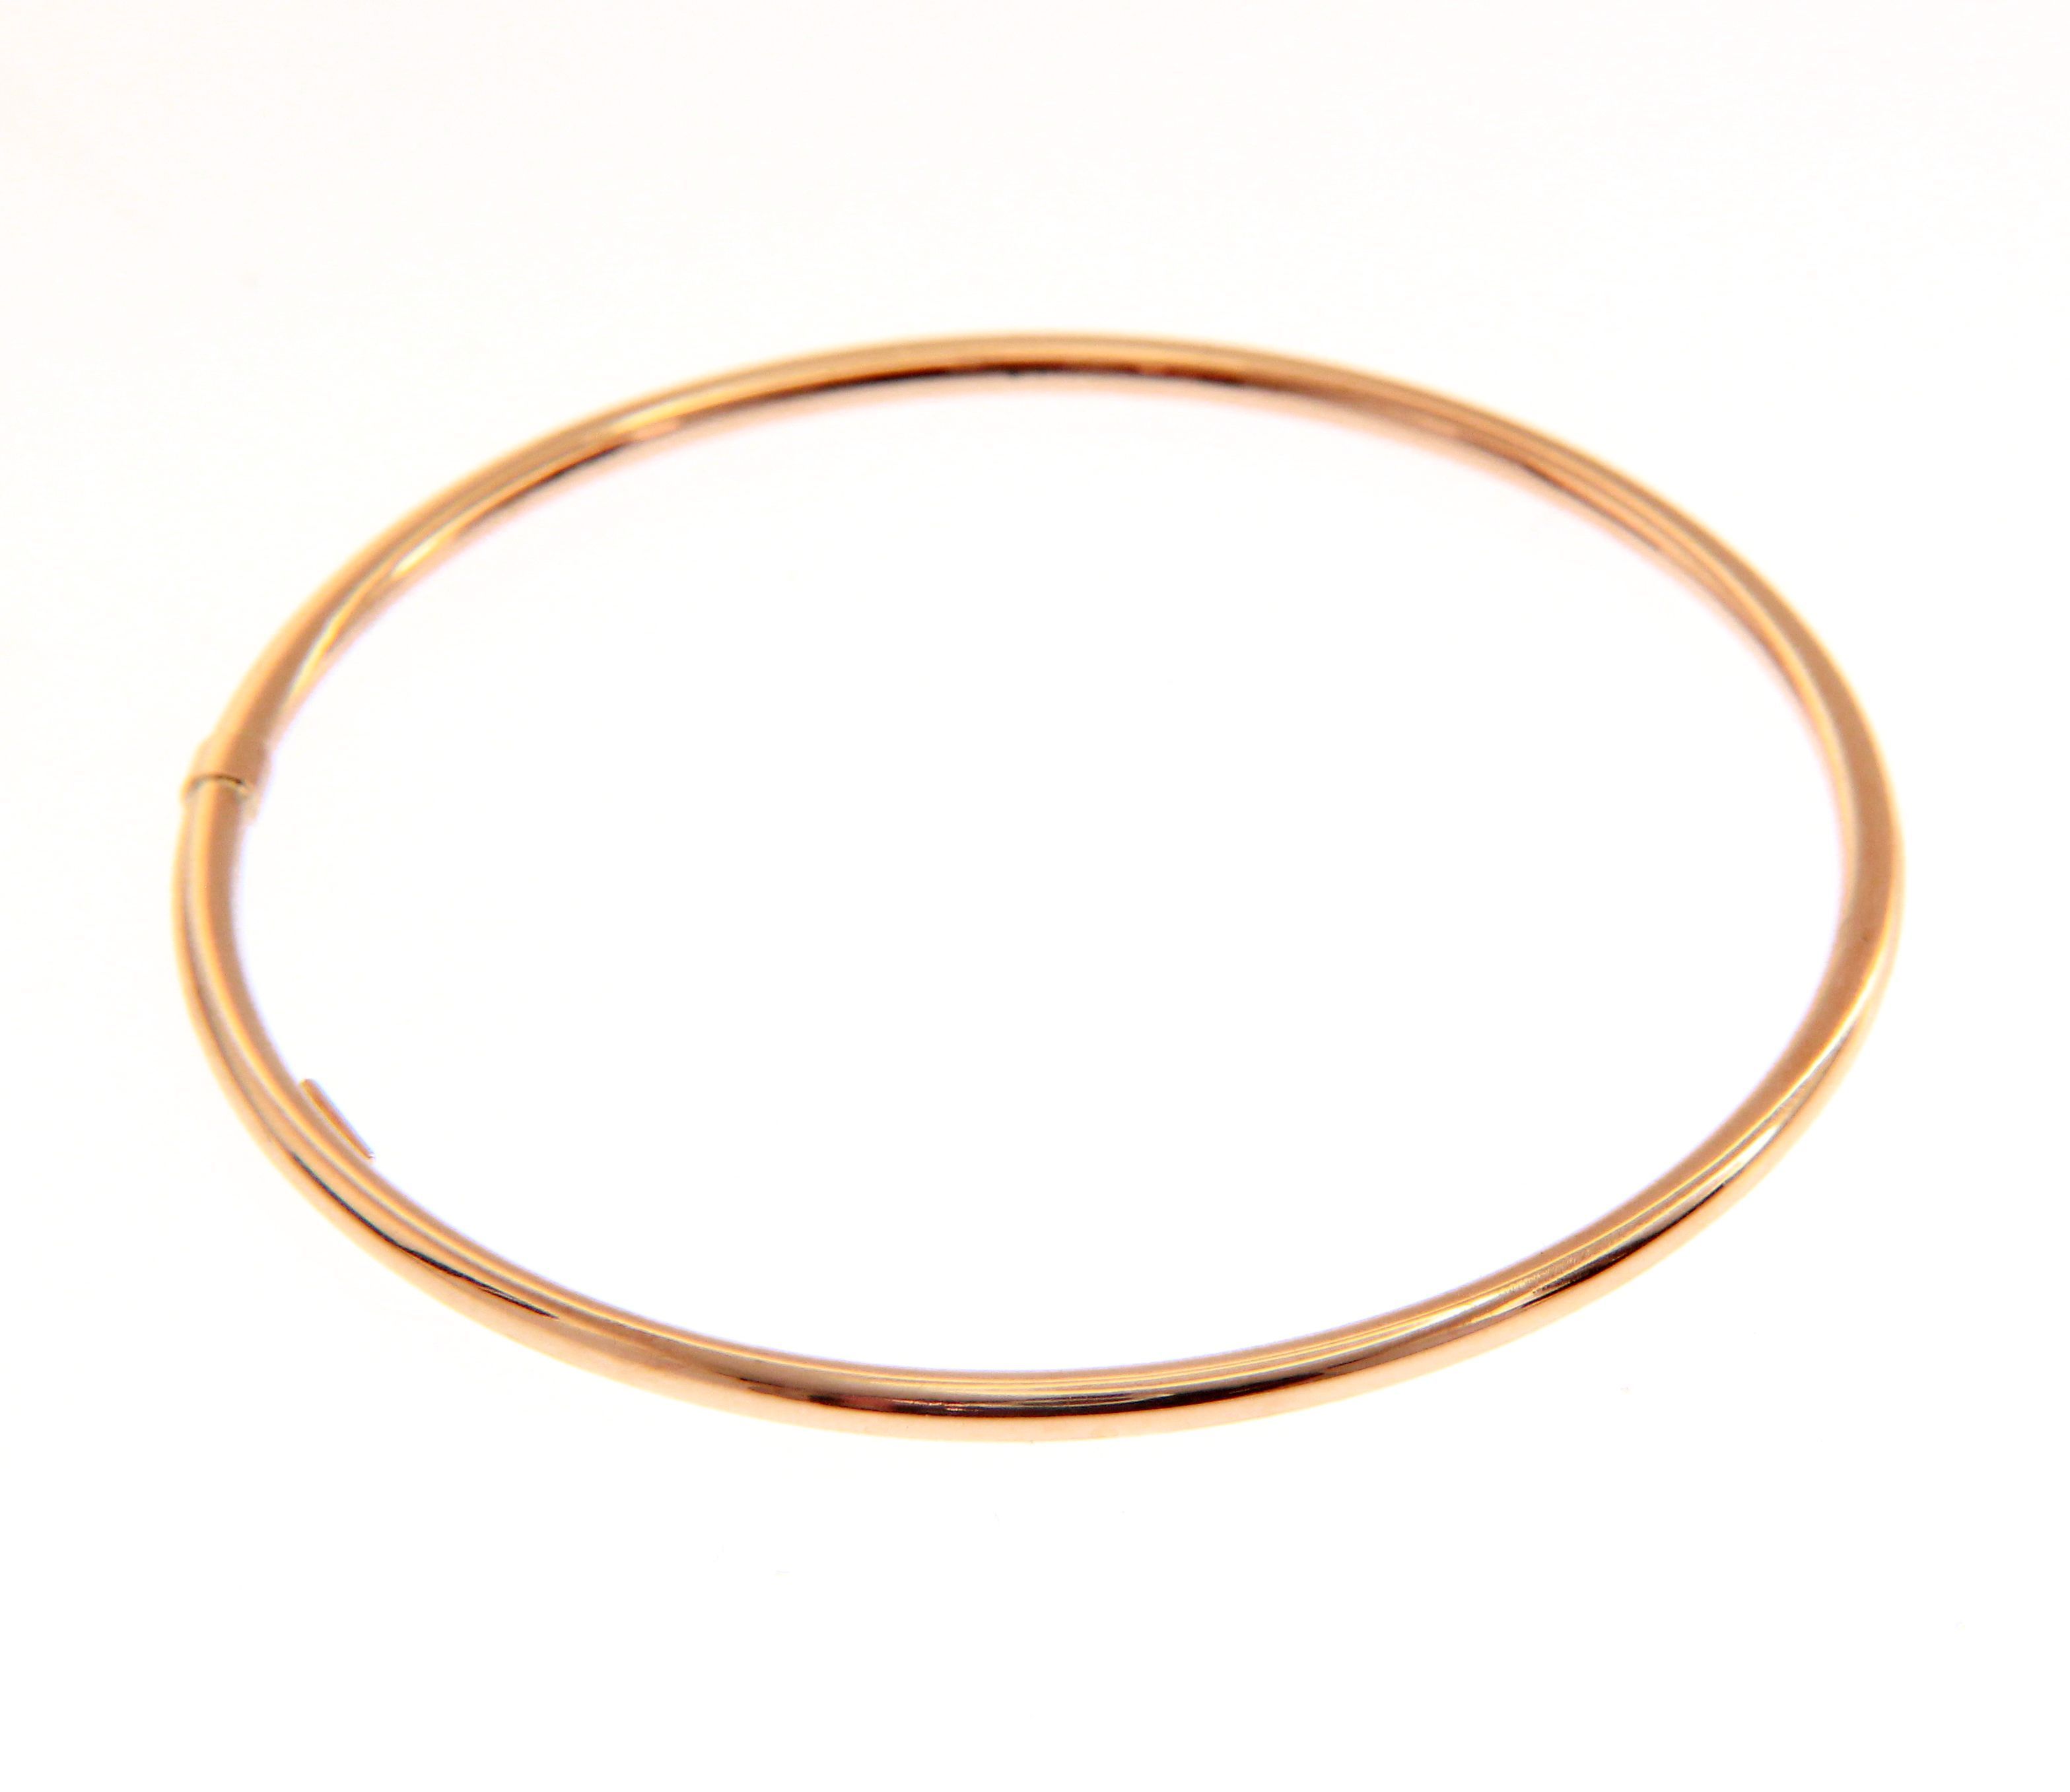 Rose gold oval bracelet with clasp k14 (code S201307)